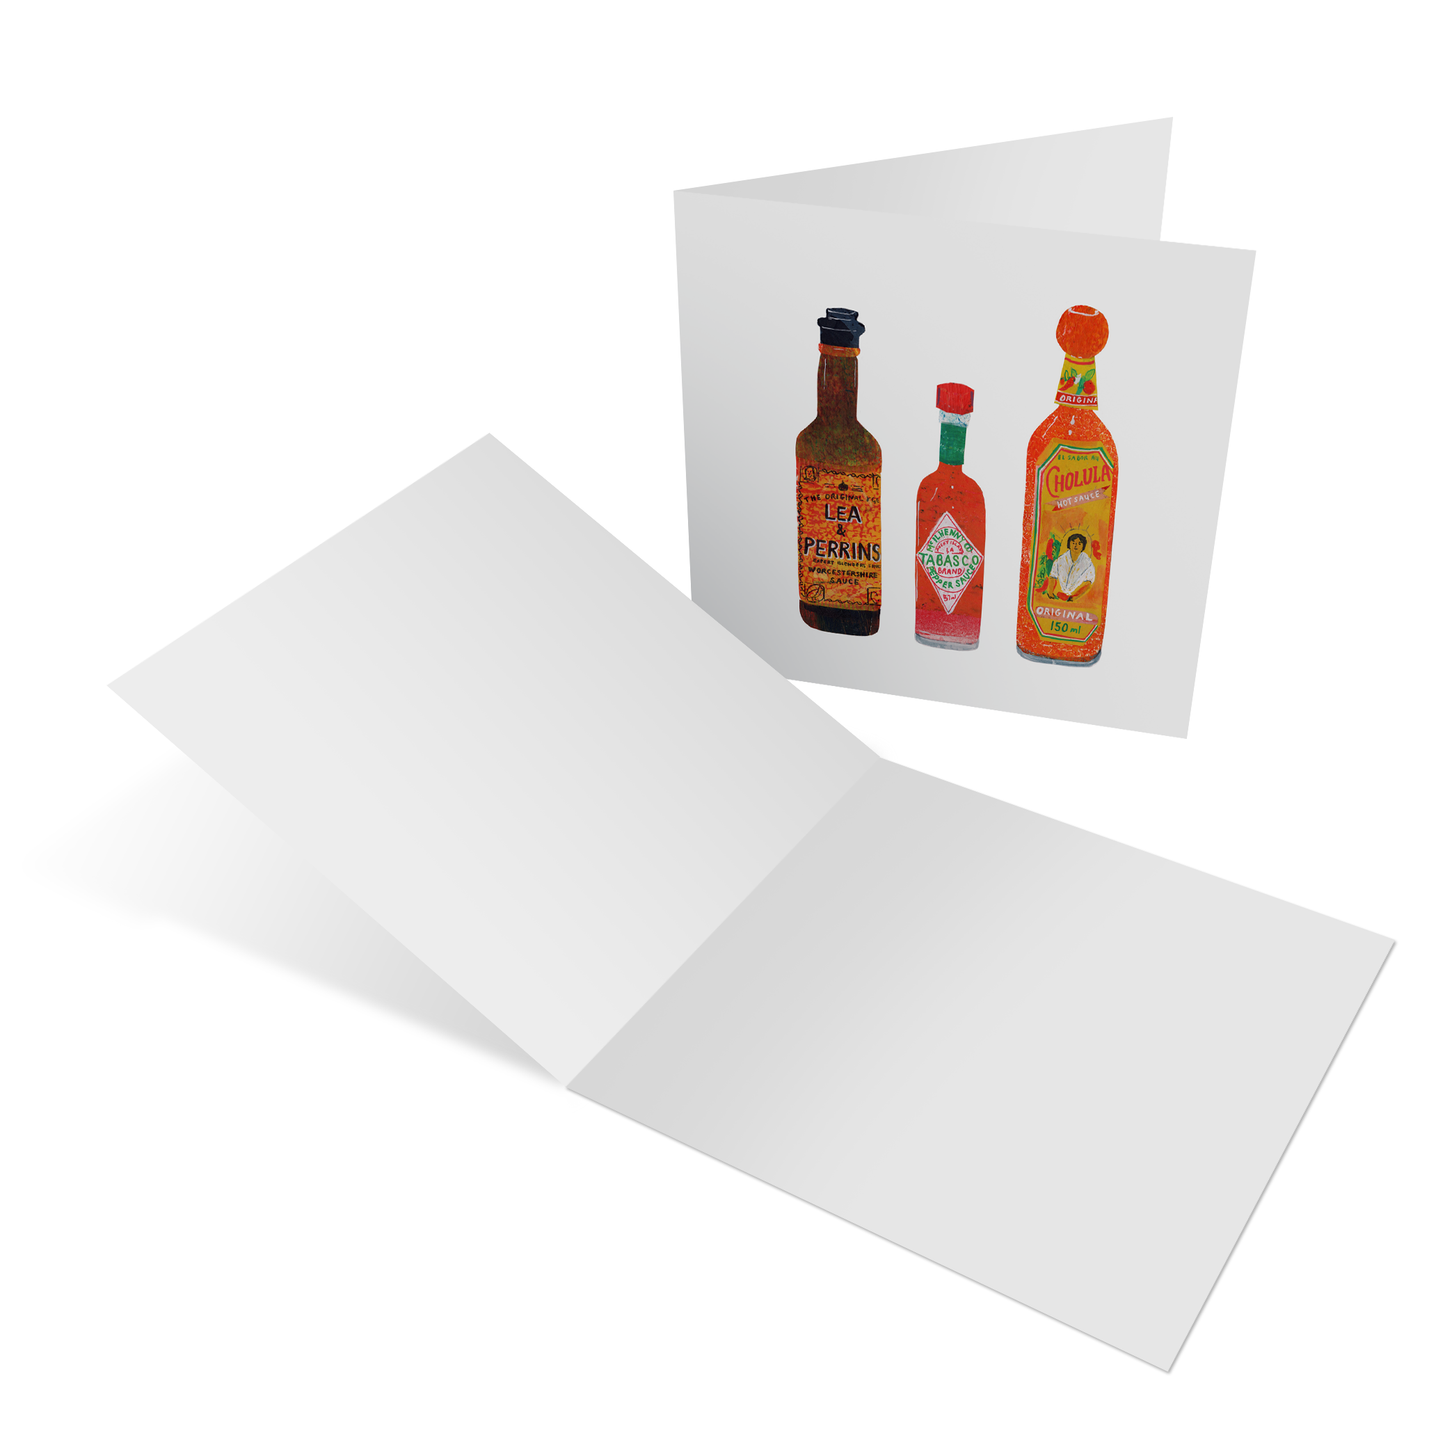 food collection of four greeting cards